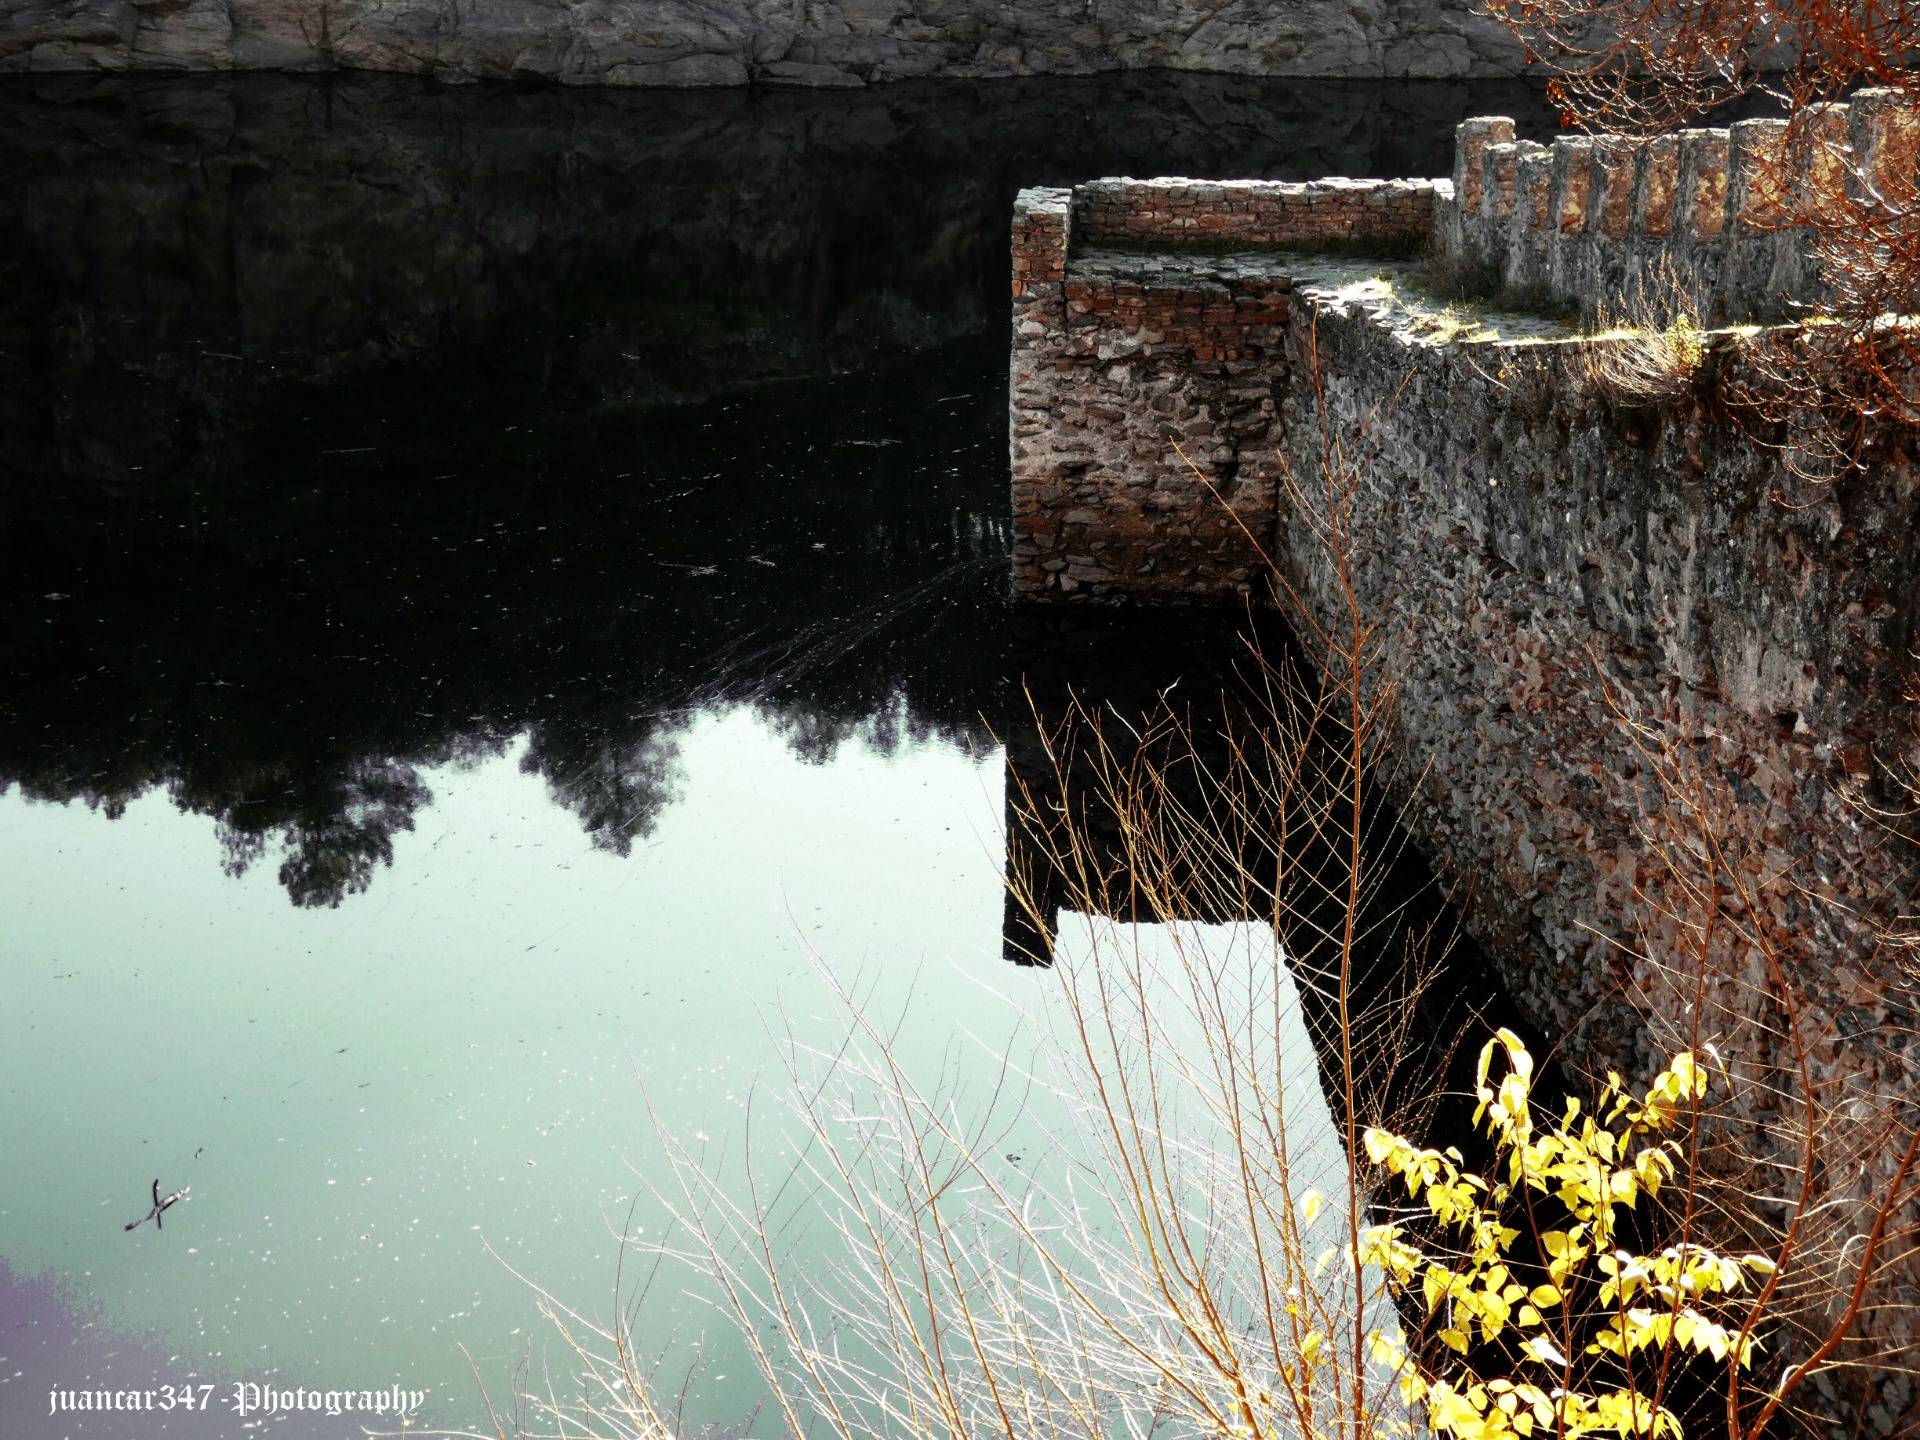 The Lozoya river caresses part of the medieval walls